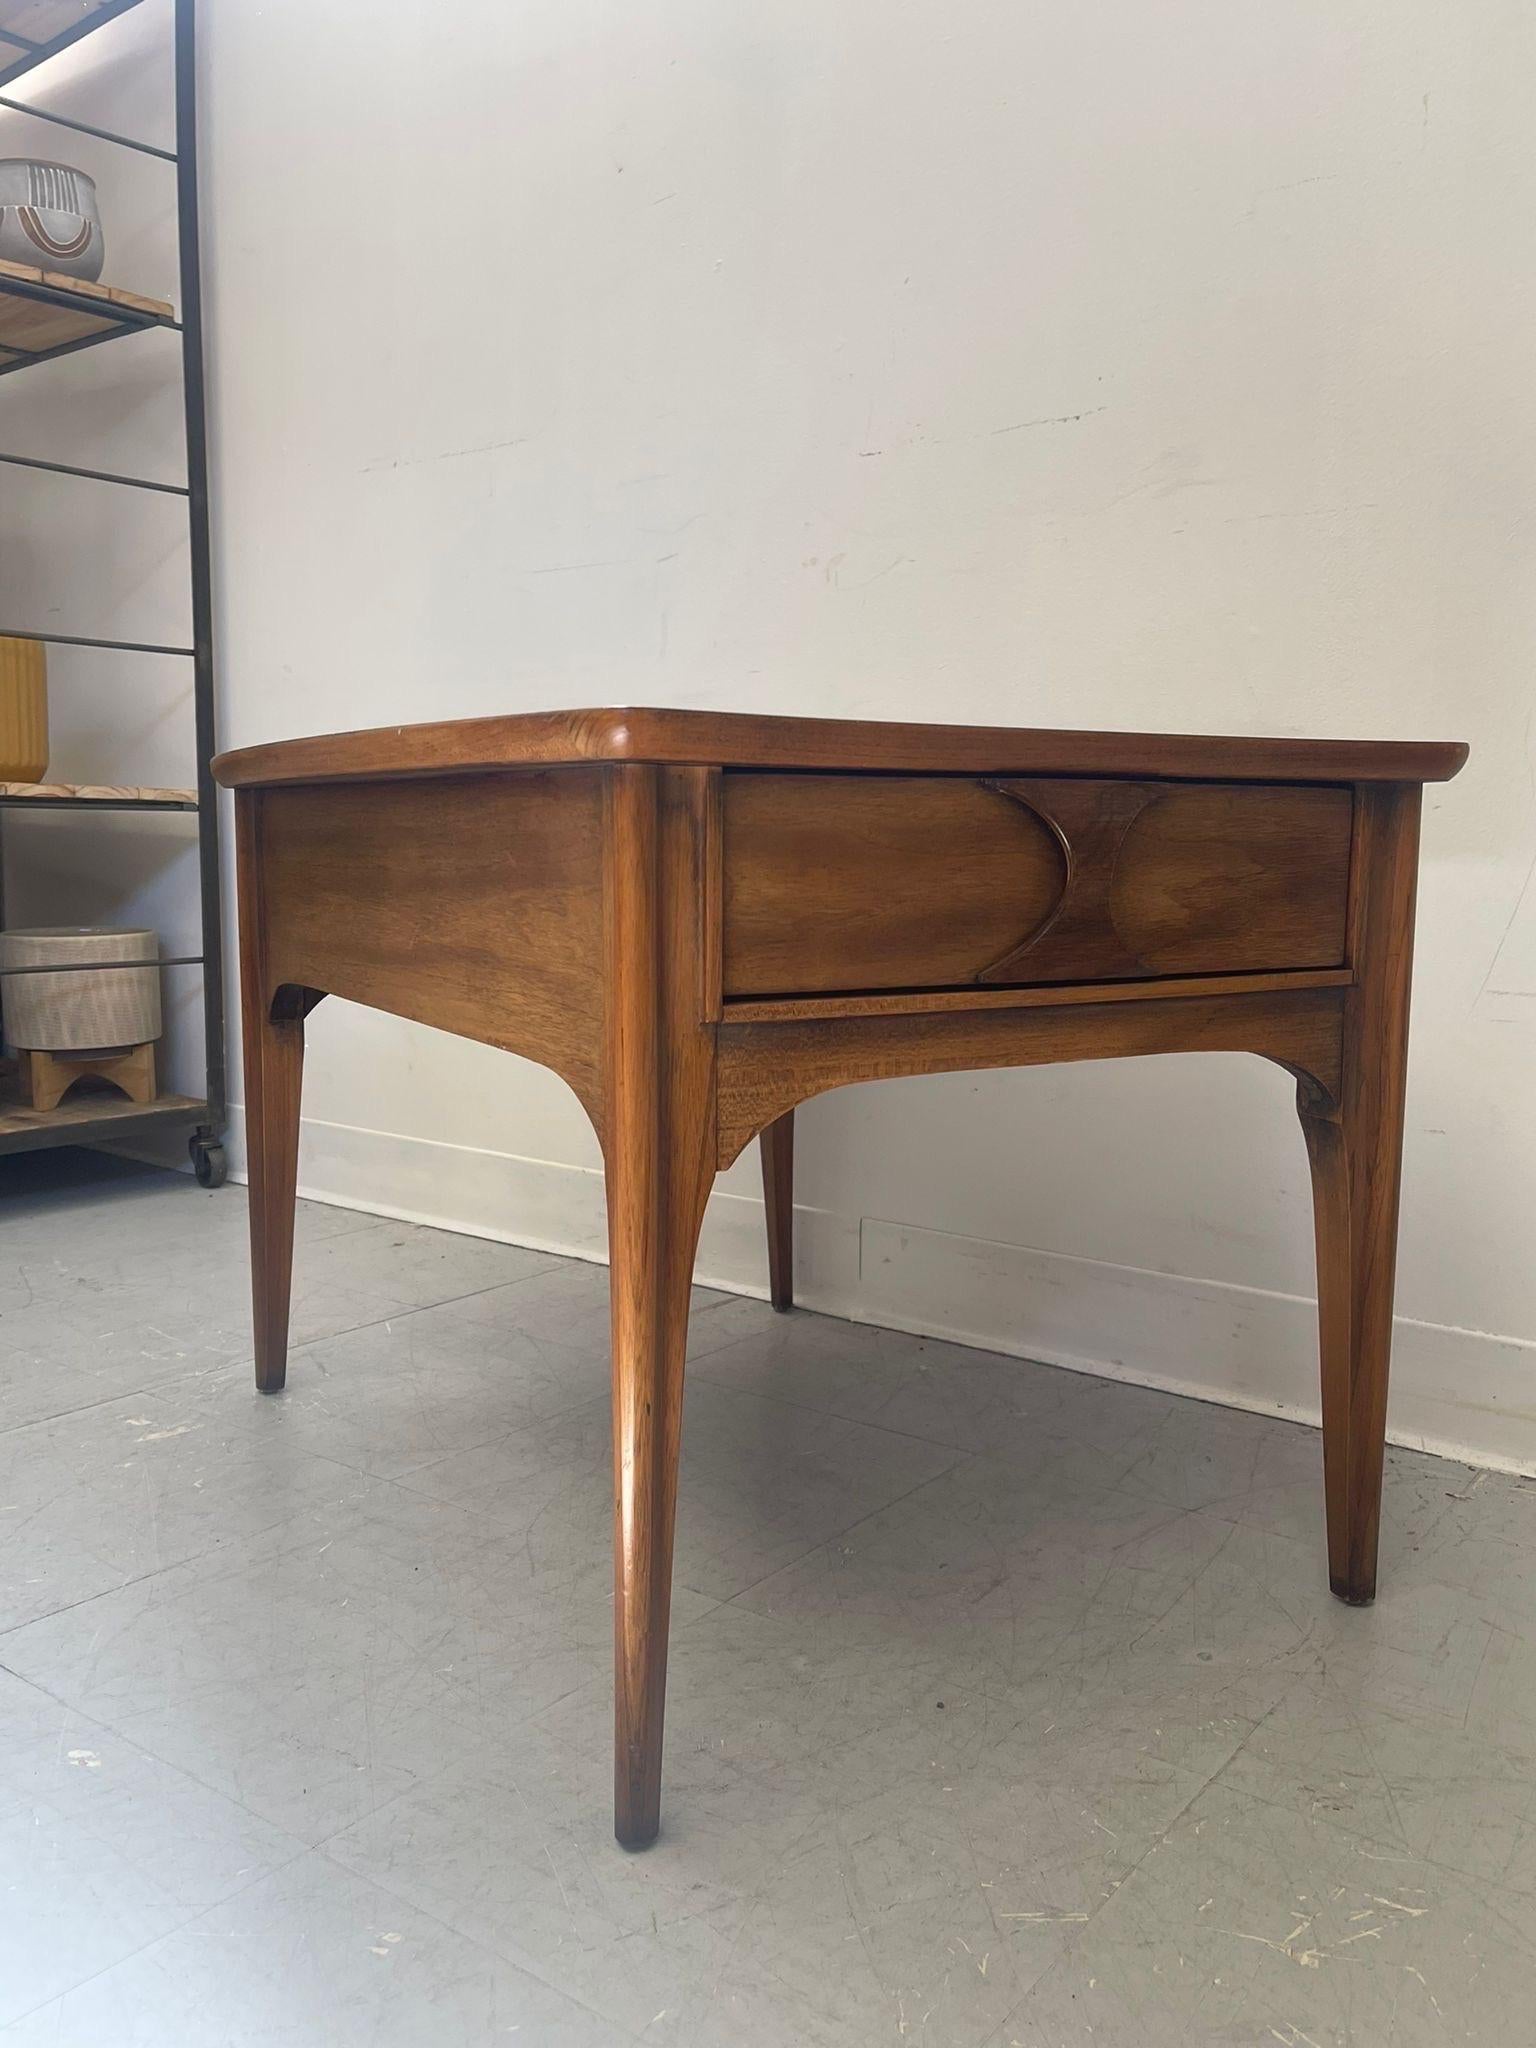 Walnut Vintage Mid Century Modern Accent Table. Single Drawer. For Sale